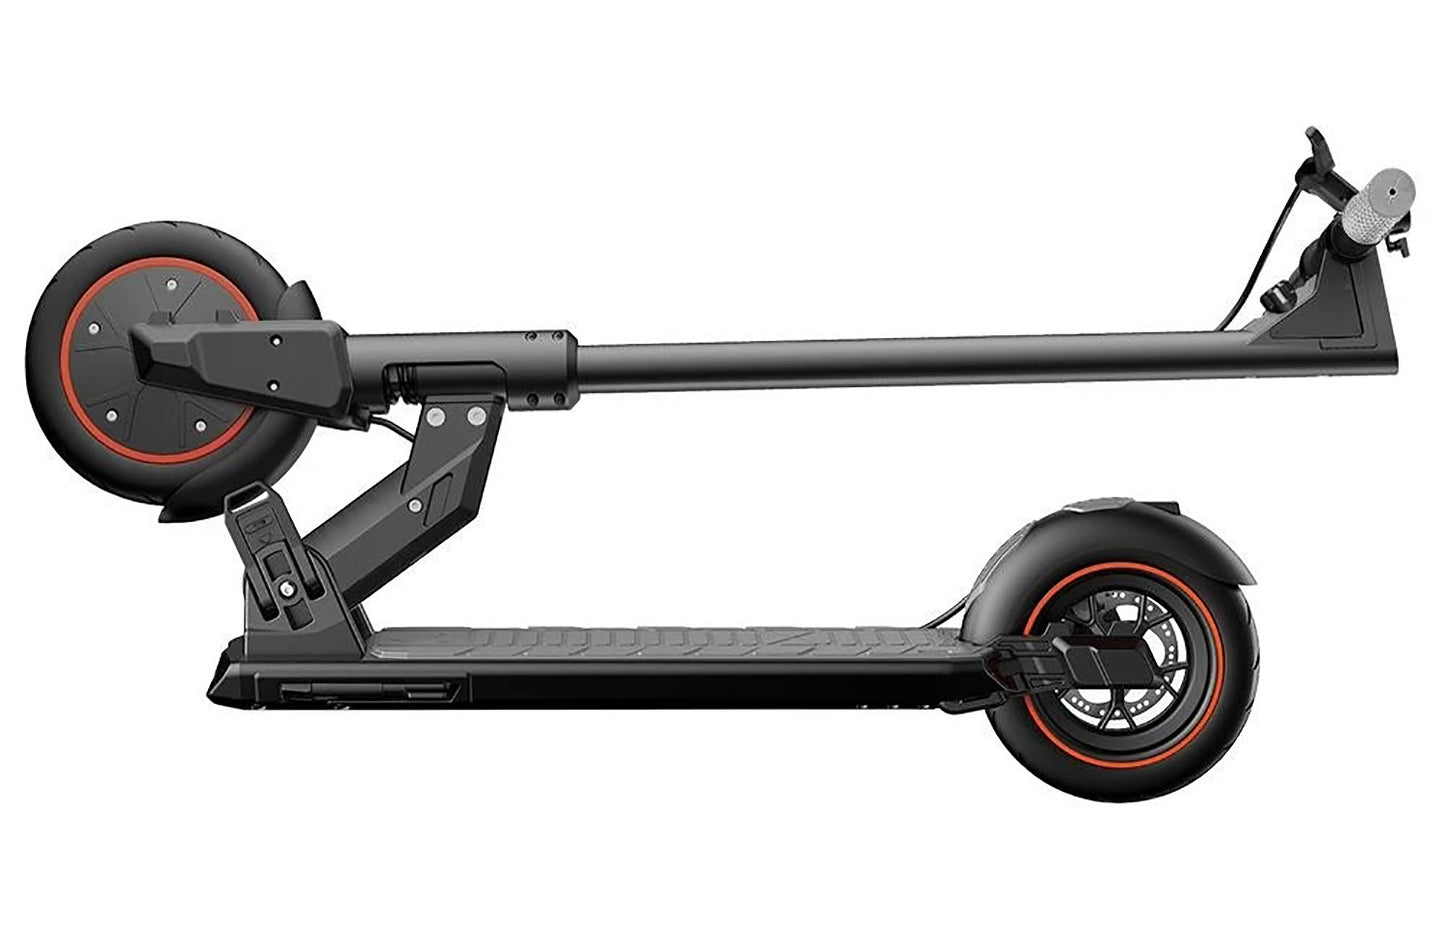 TIRE FOLDABLE &PORTABLE ELECTRIC SCOOTER